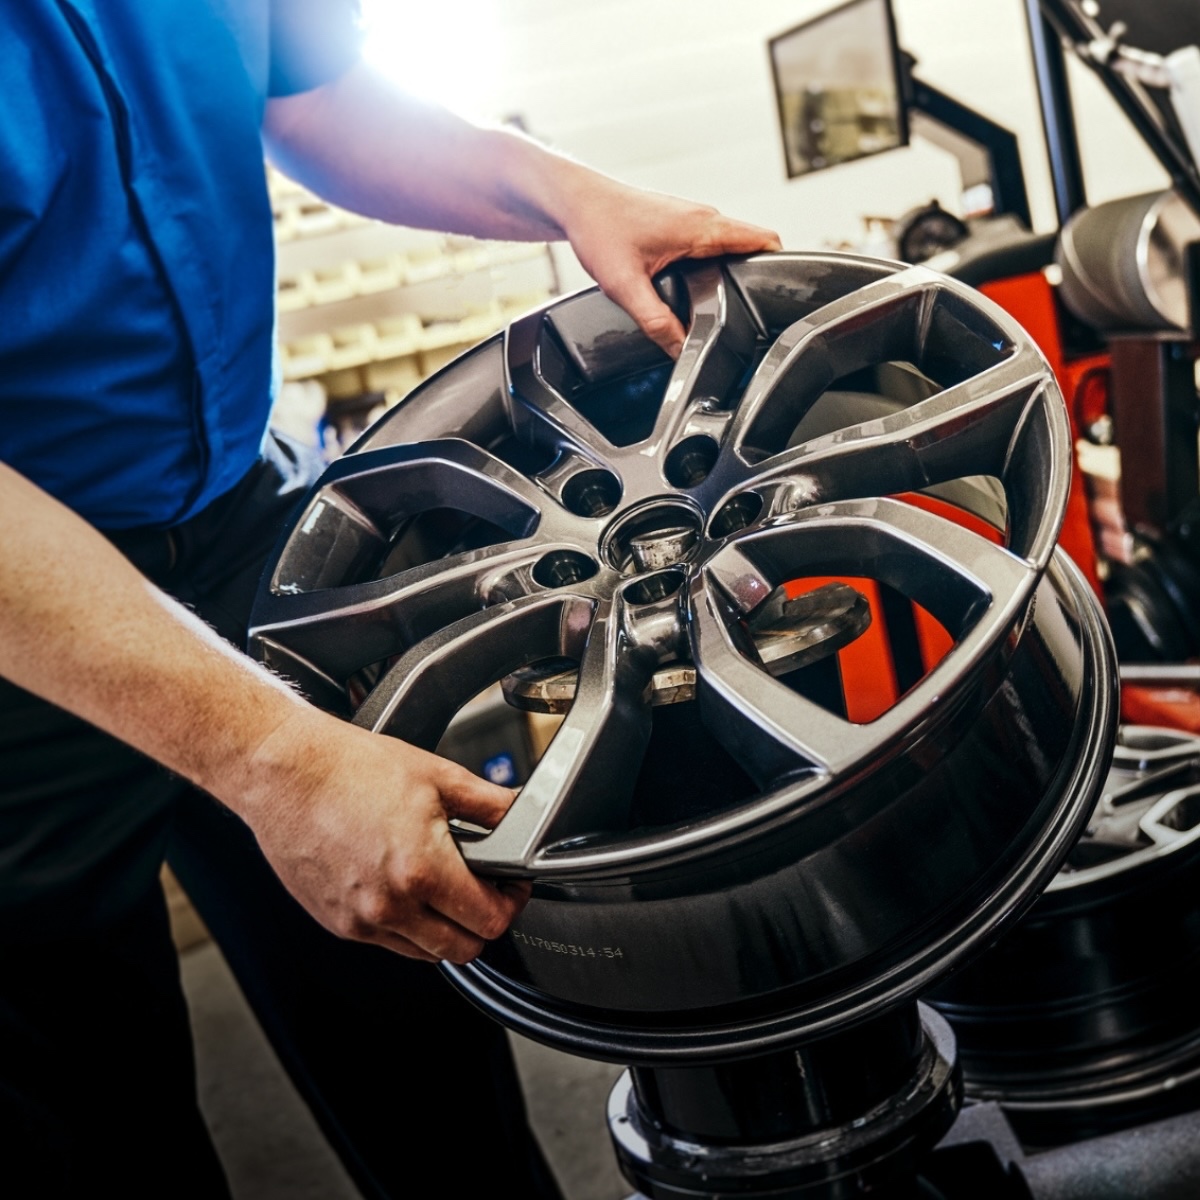 Gear up for your next adventure by booking a #service appointment for your ride with the help of our user-friendly online scheduling tool on our website. 📲🚙 Quick, easy, and gets you back on the road faster! 😎